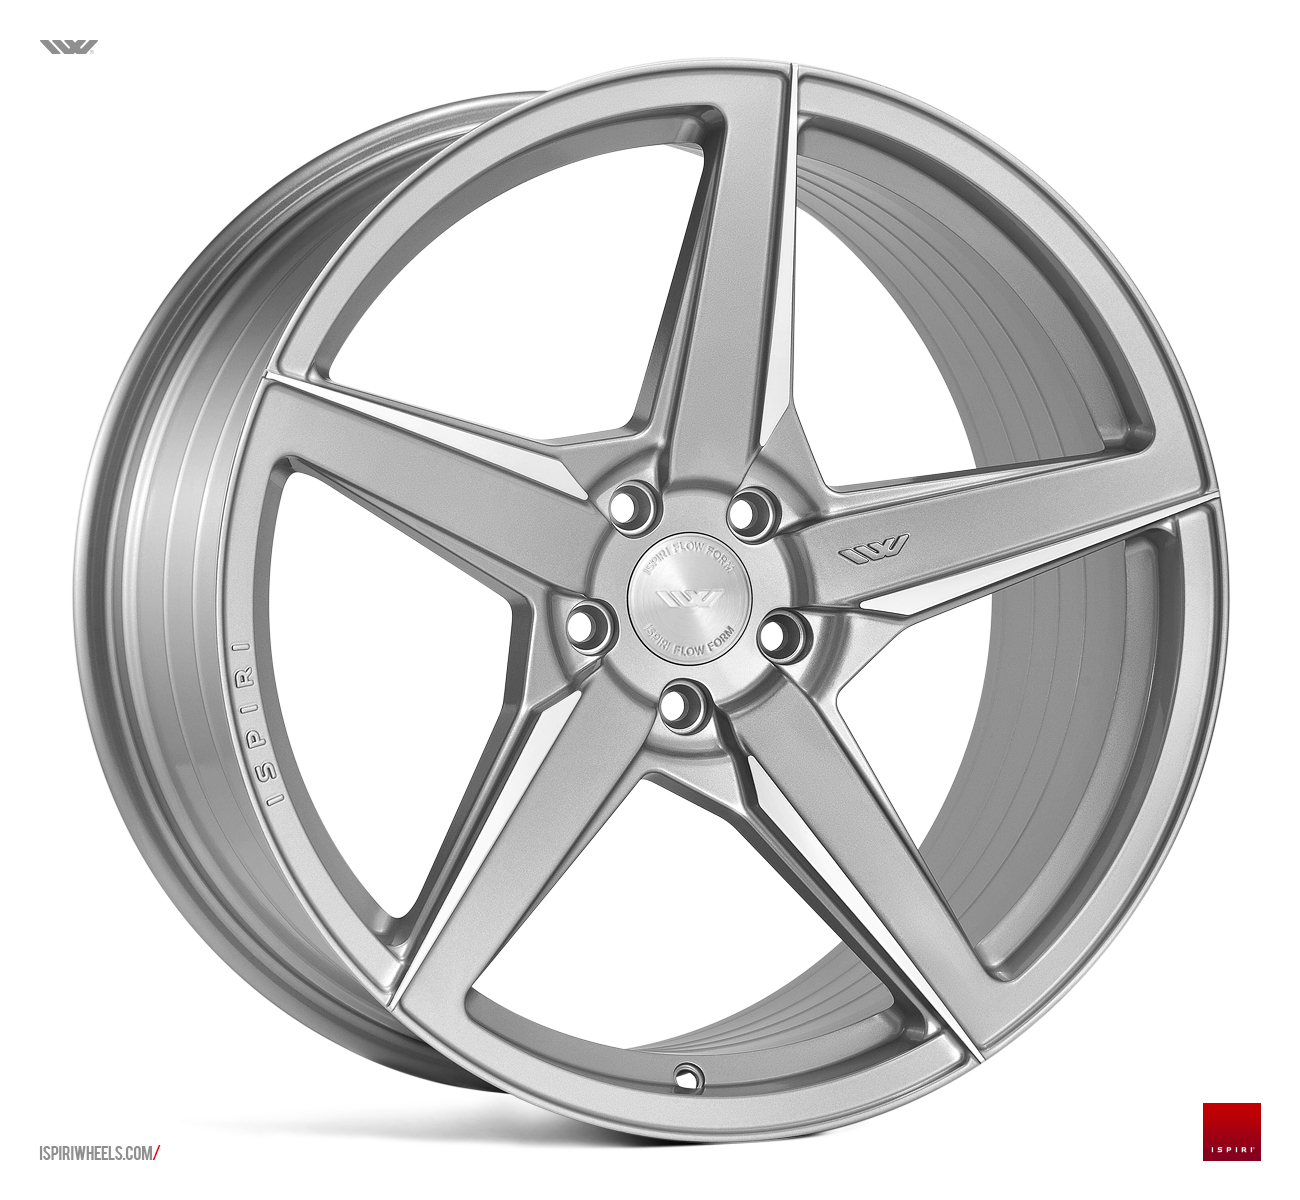 NEW 21  ISPIRI FFR5 5 SPOKE ALLOYS IN PURE SILVER BRUSHED  WITH WIDER 10 5  REAR